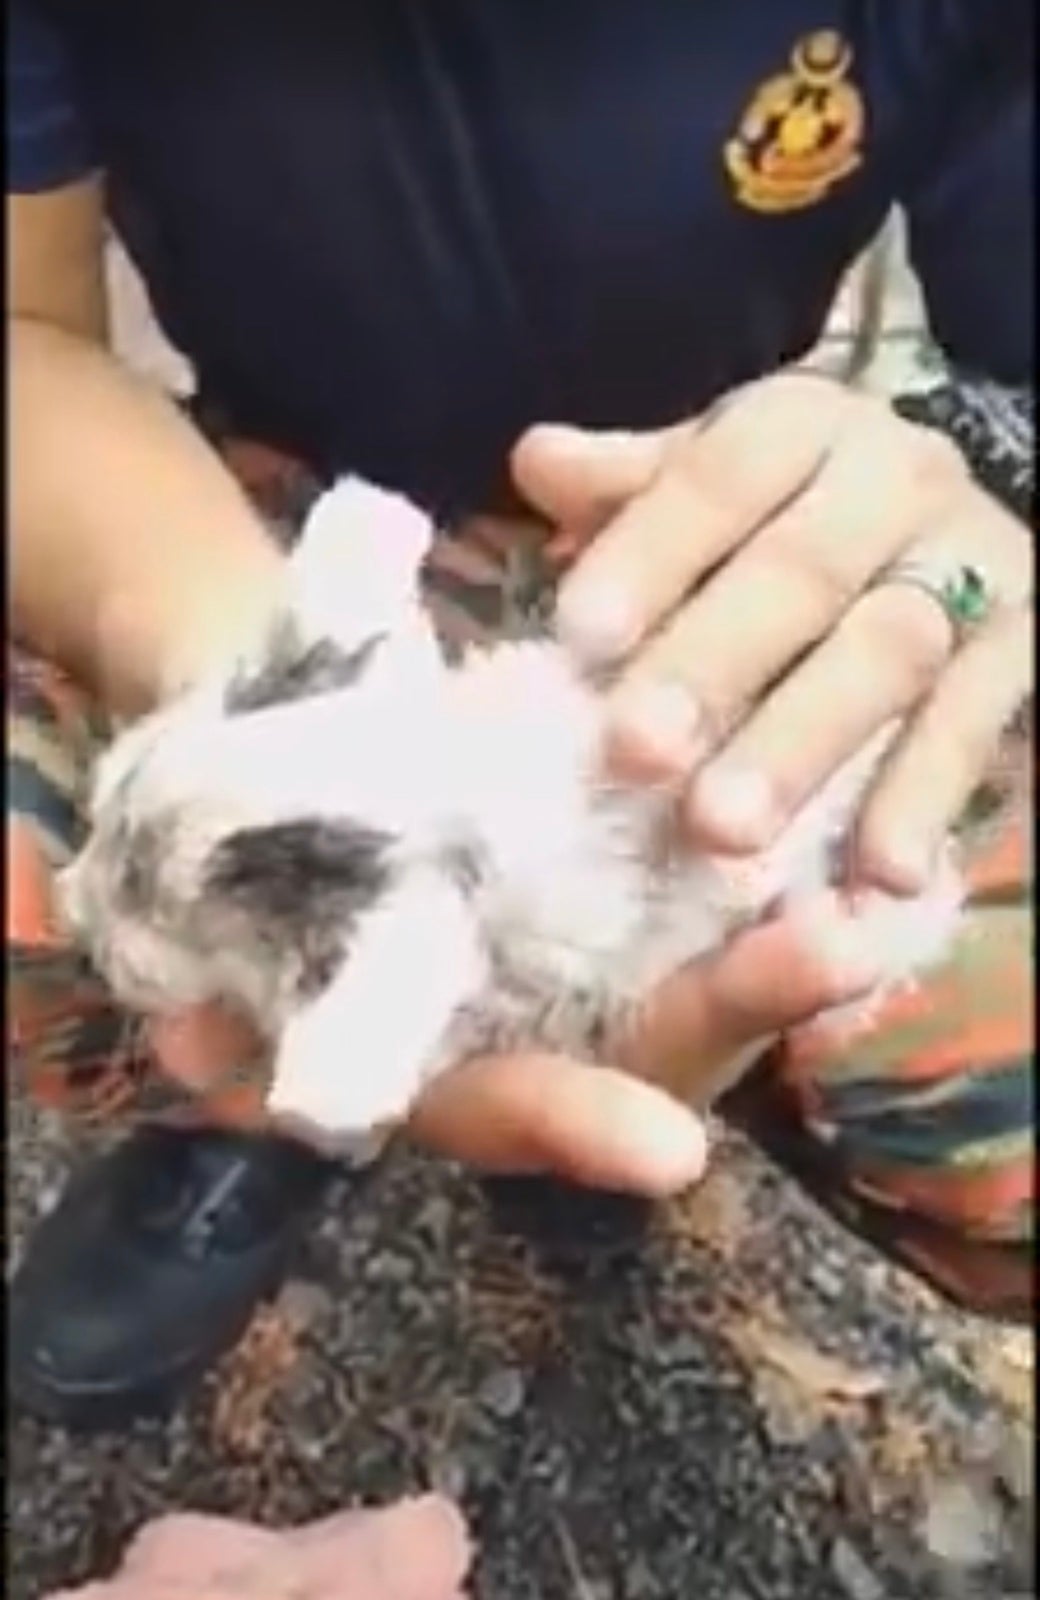 Kedah Firefighter Goes Viral After Resurrecting Drowning Kitten Back To Life in Disastrous Lekima Thunderstorm - WORLD OF BUZZ 3